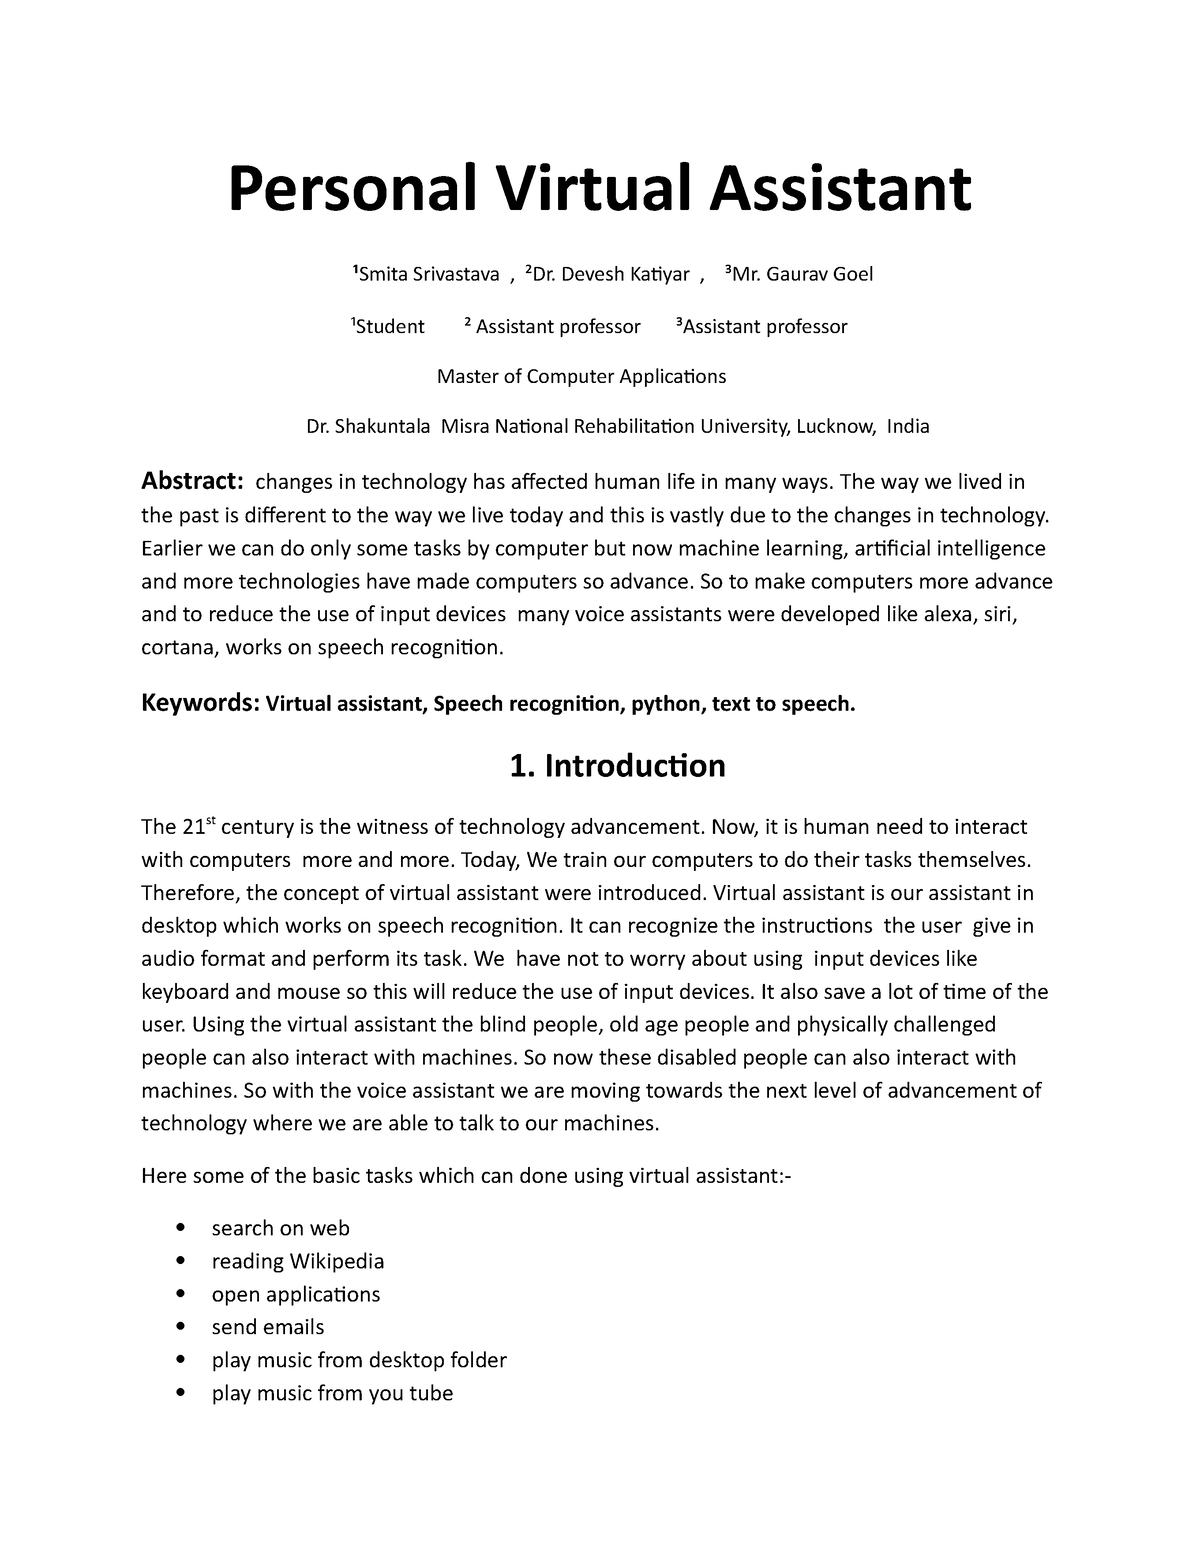 virtual assistant research papers